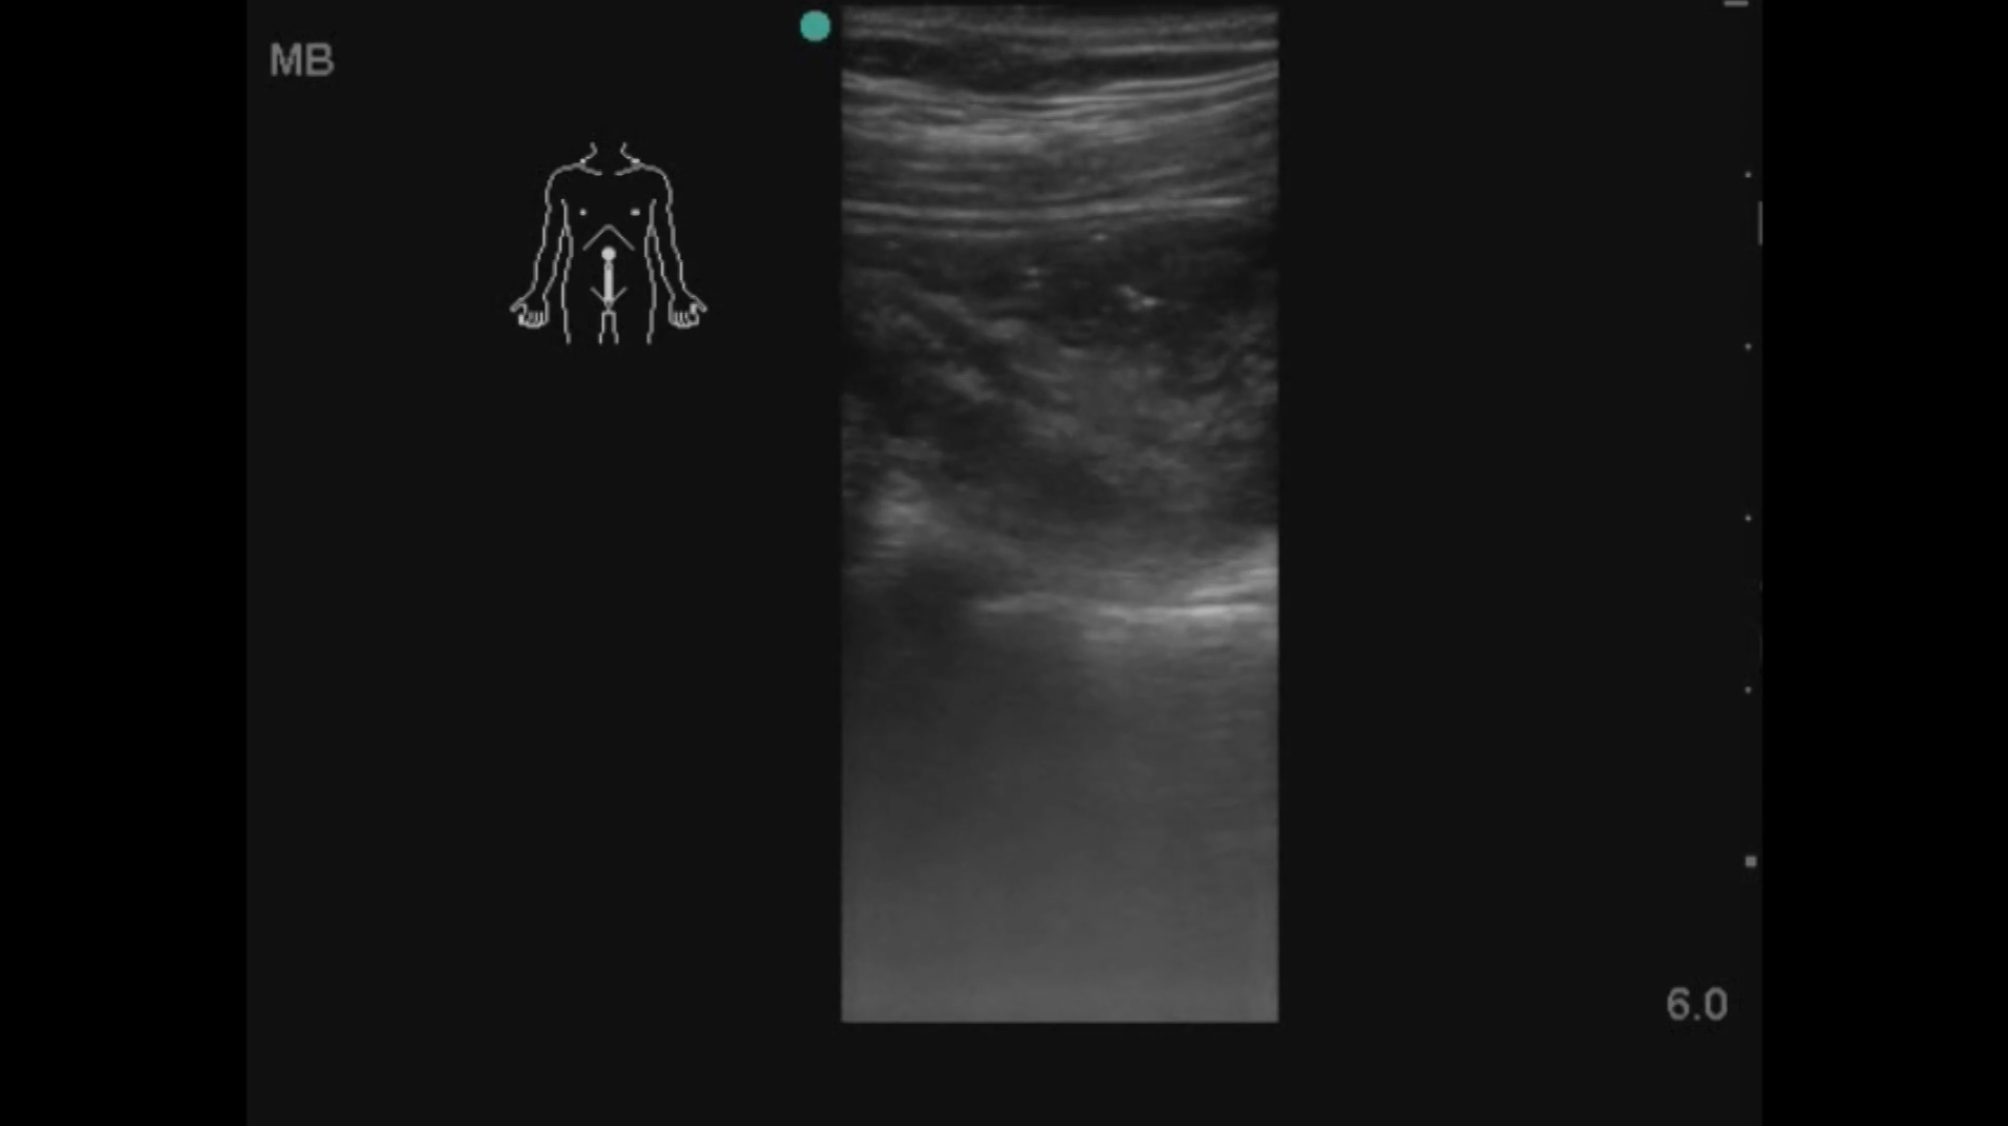 How accurate is point-of-care-ultrasound (POCUS) at diagnosing acute appendicitis?